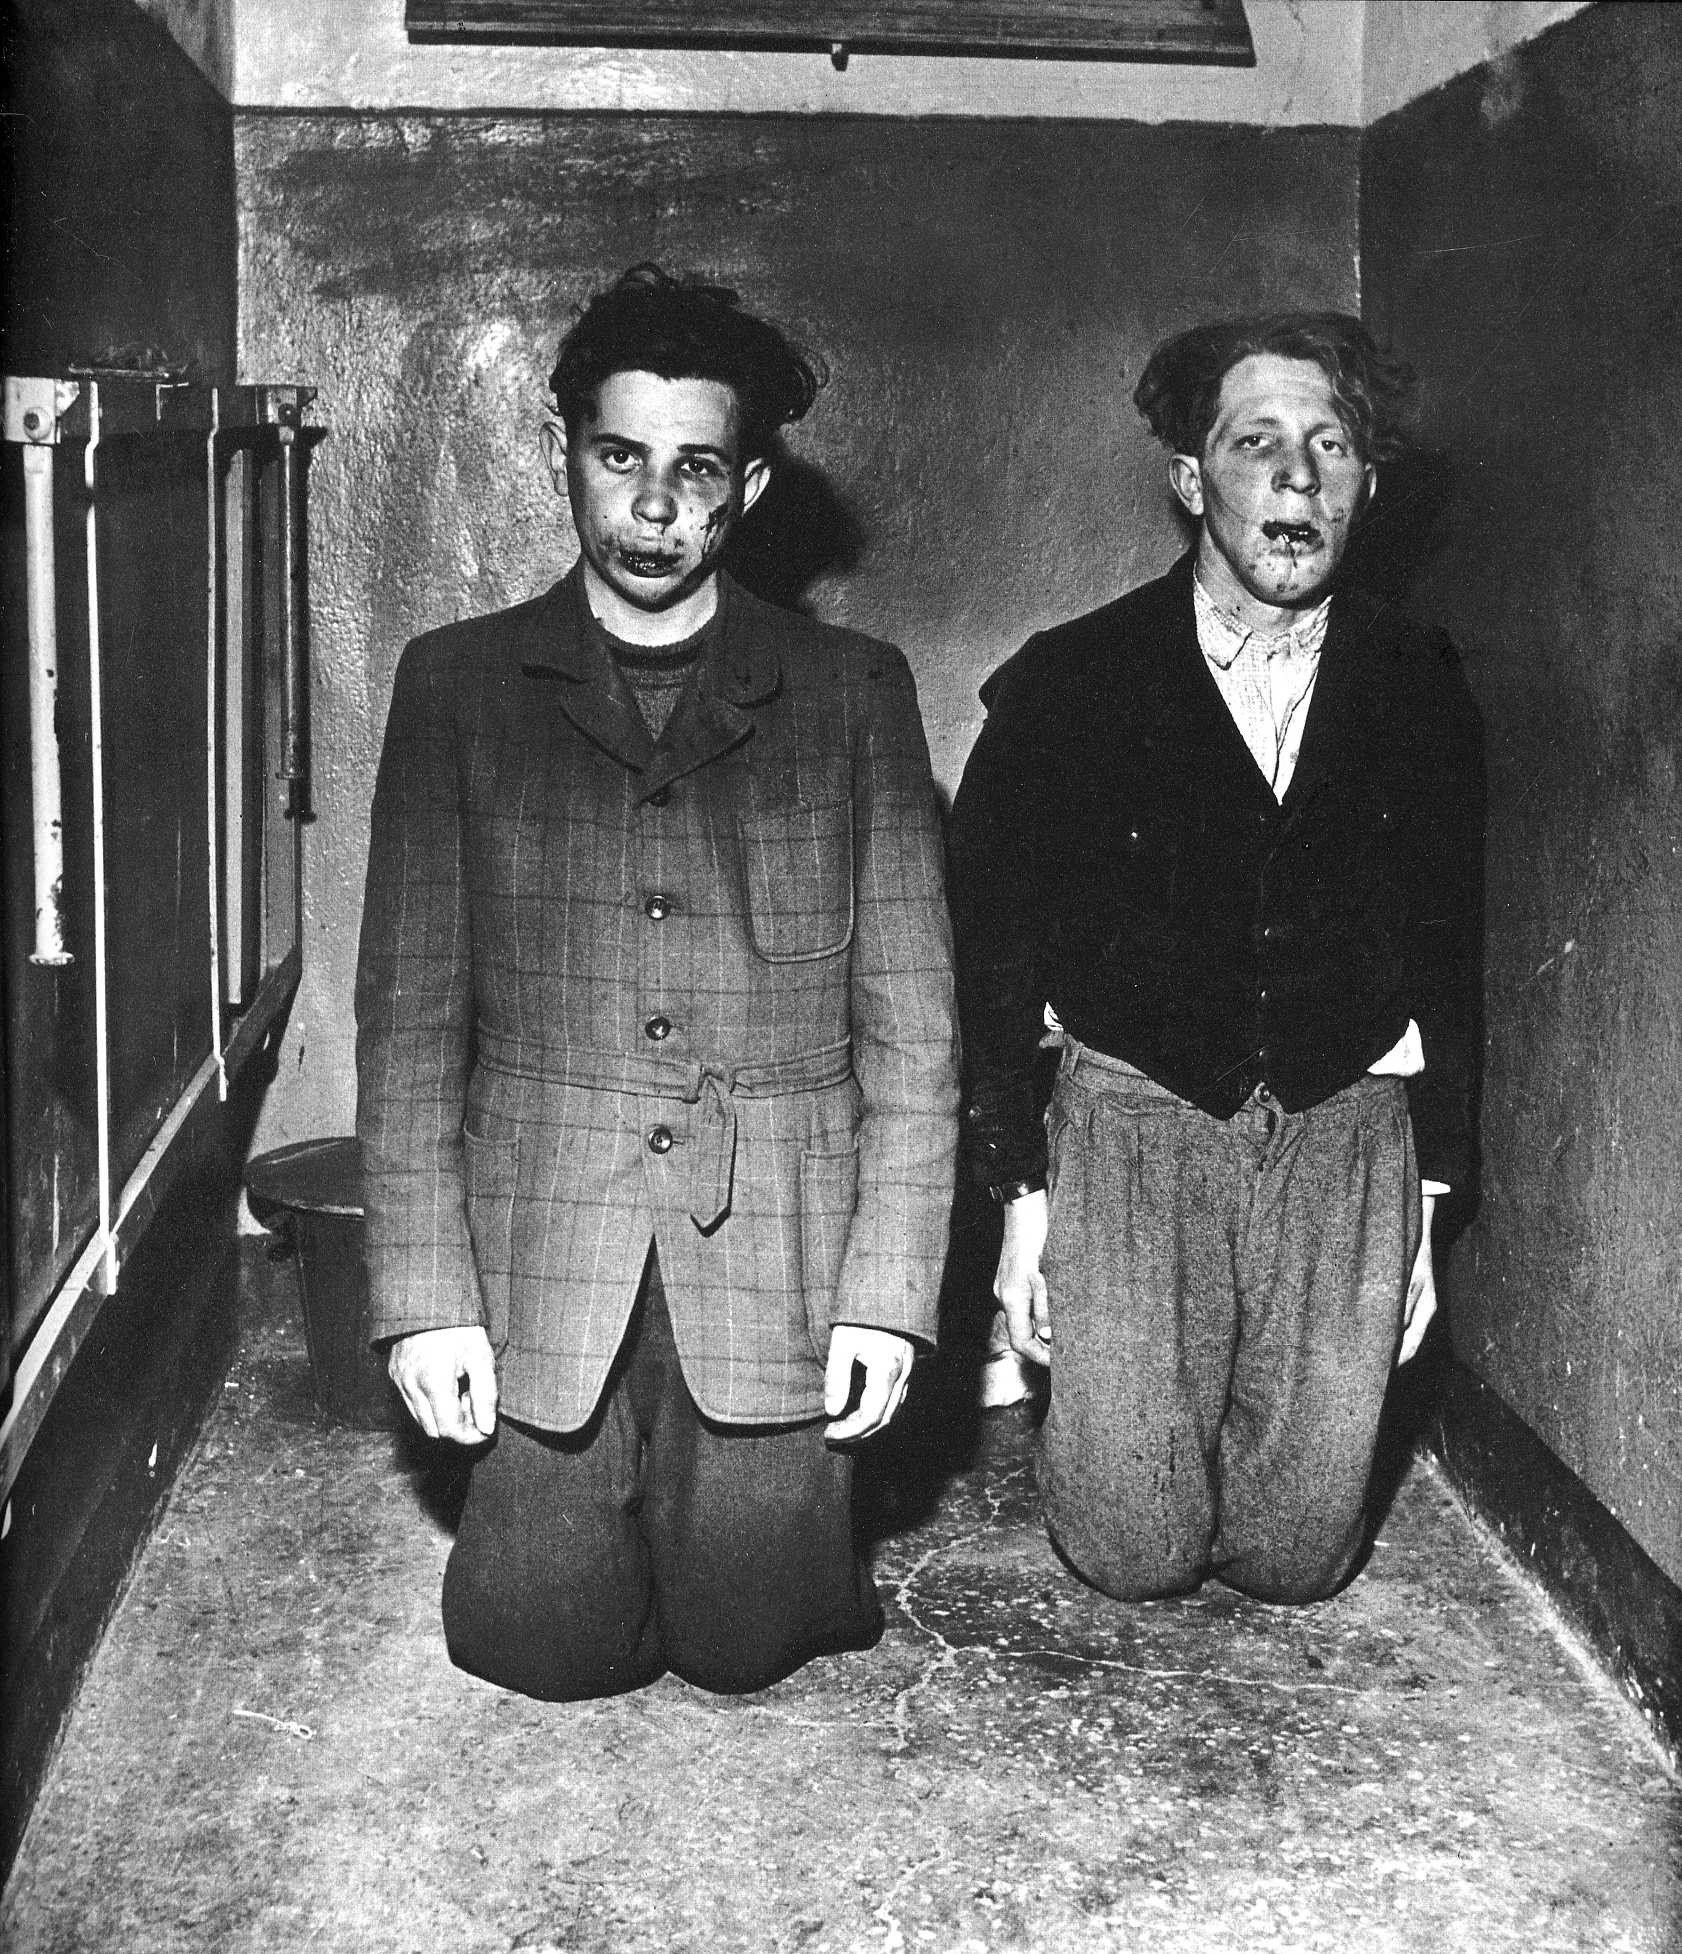 Prisoners beat two guards after their concentration camp is liberated by US forces